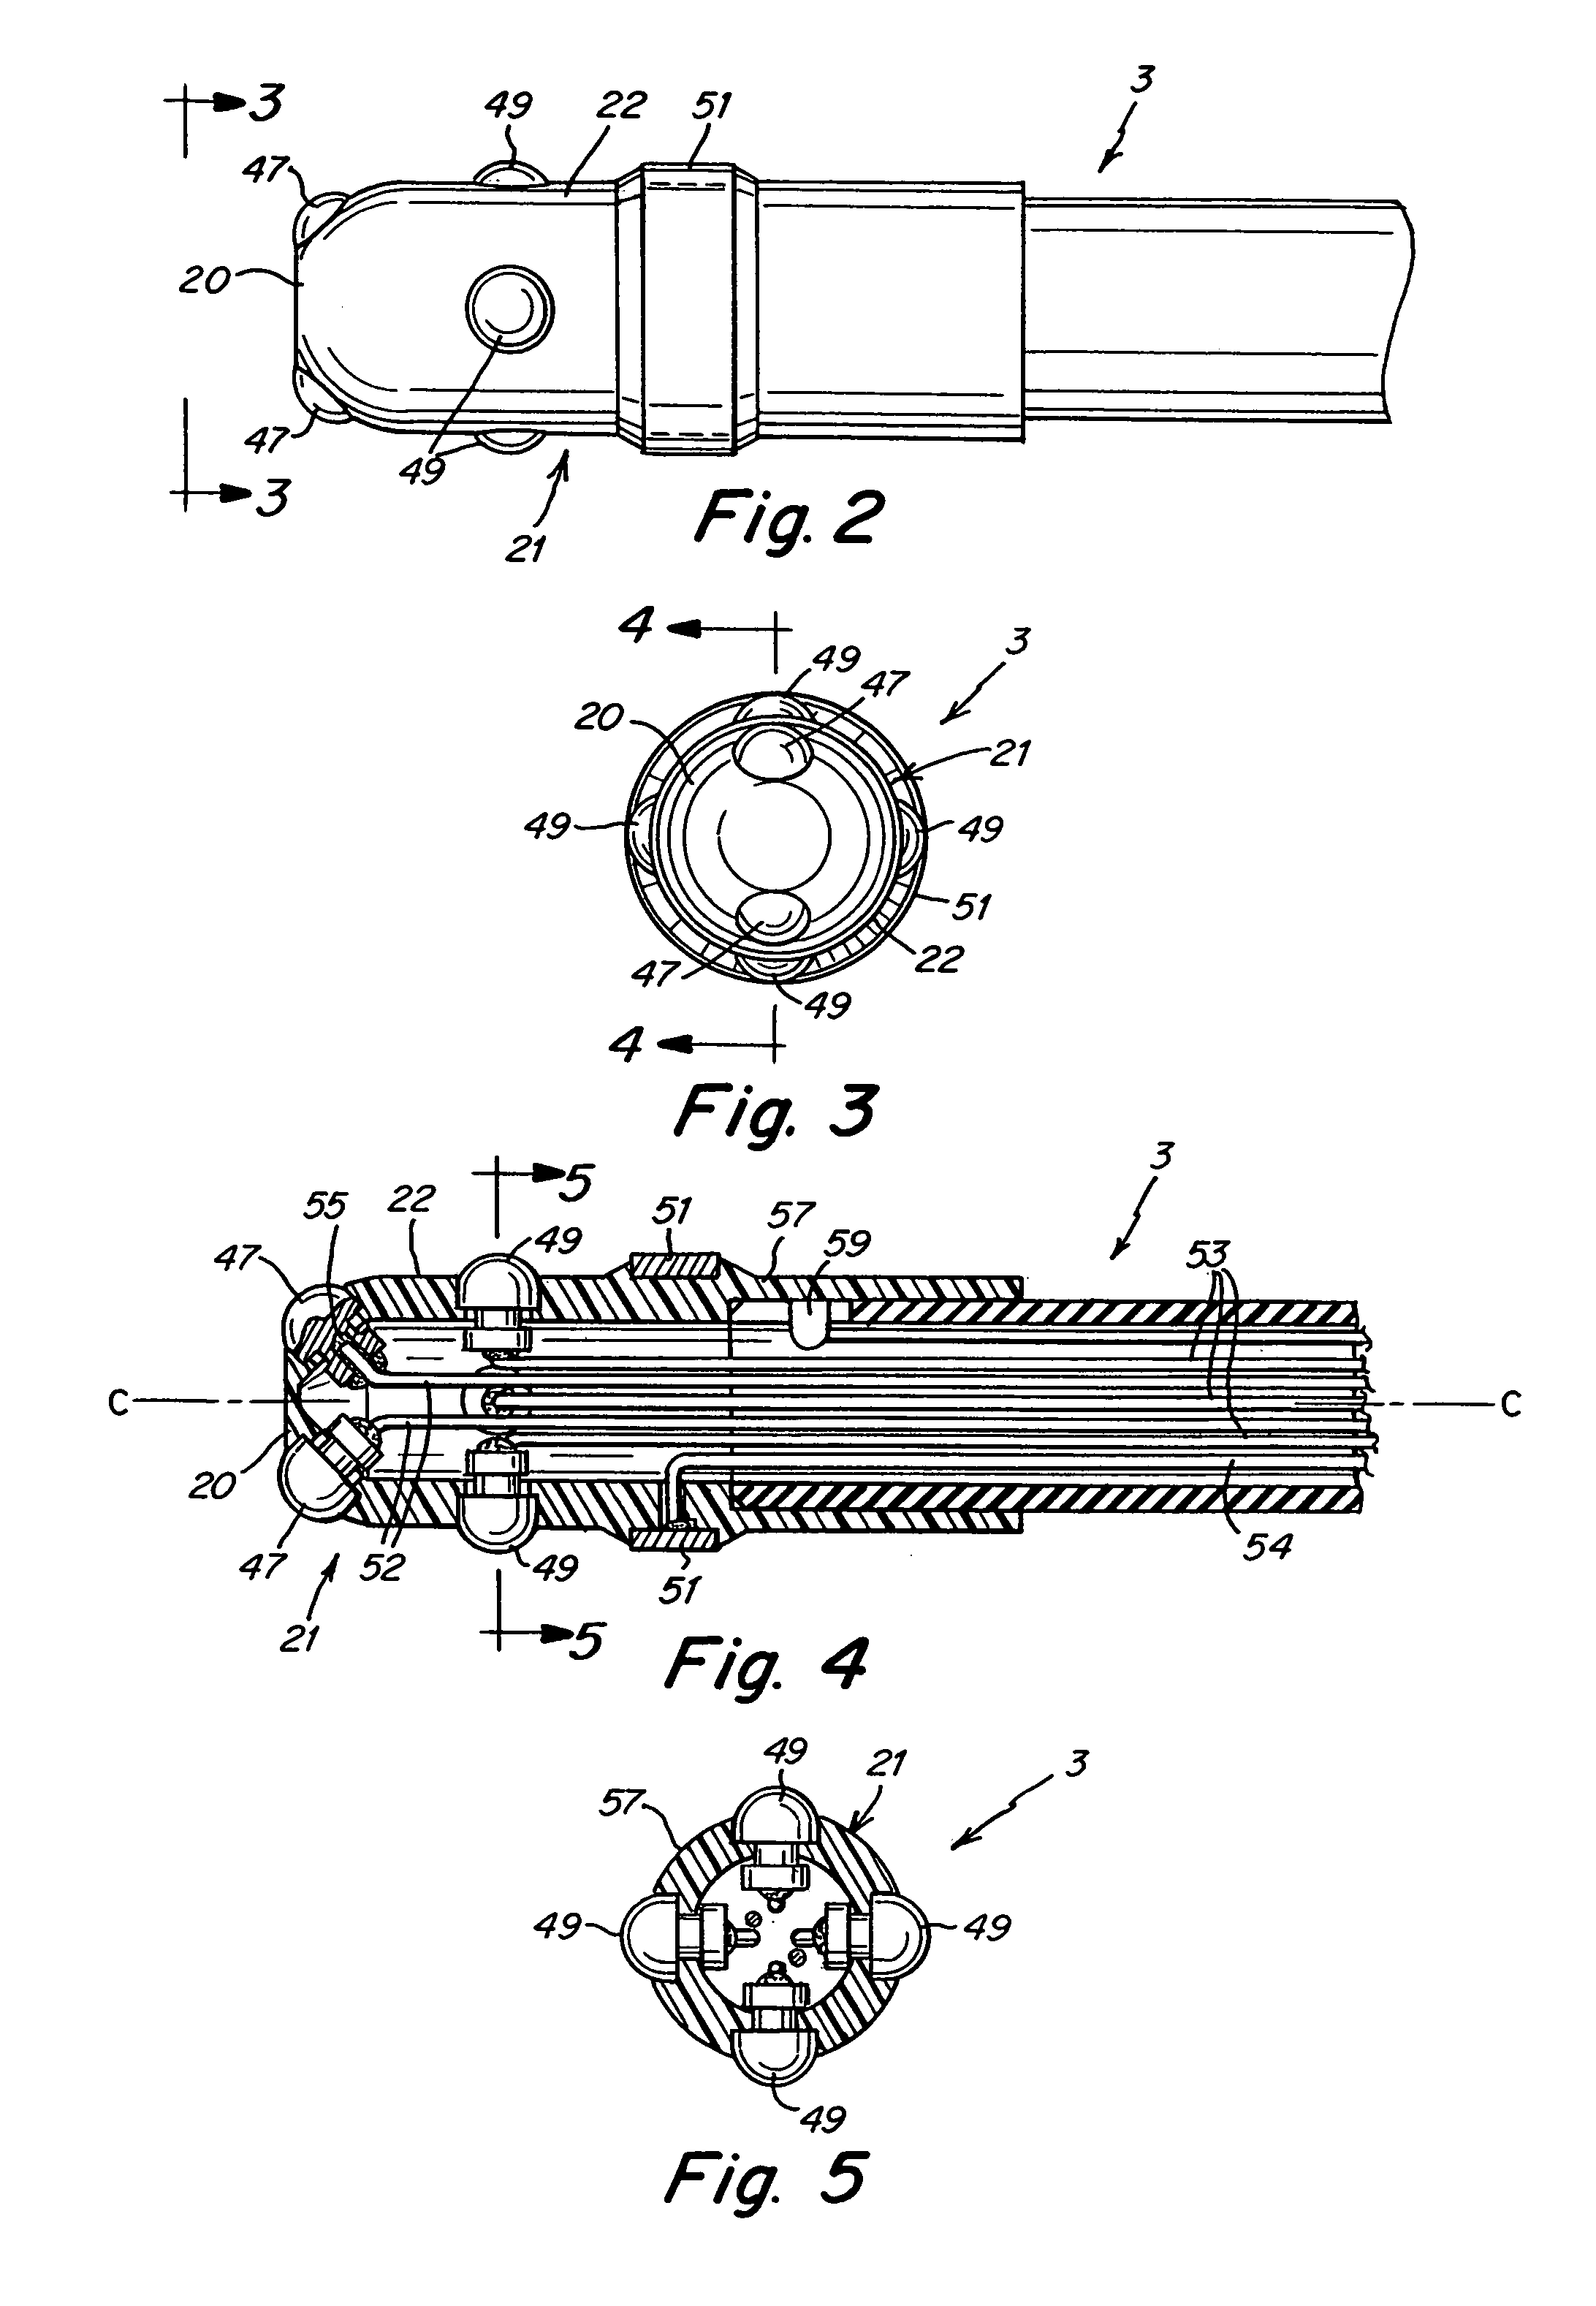 Microelectrode catheter for mapping and ablation